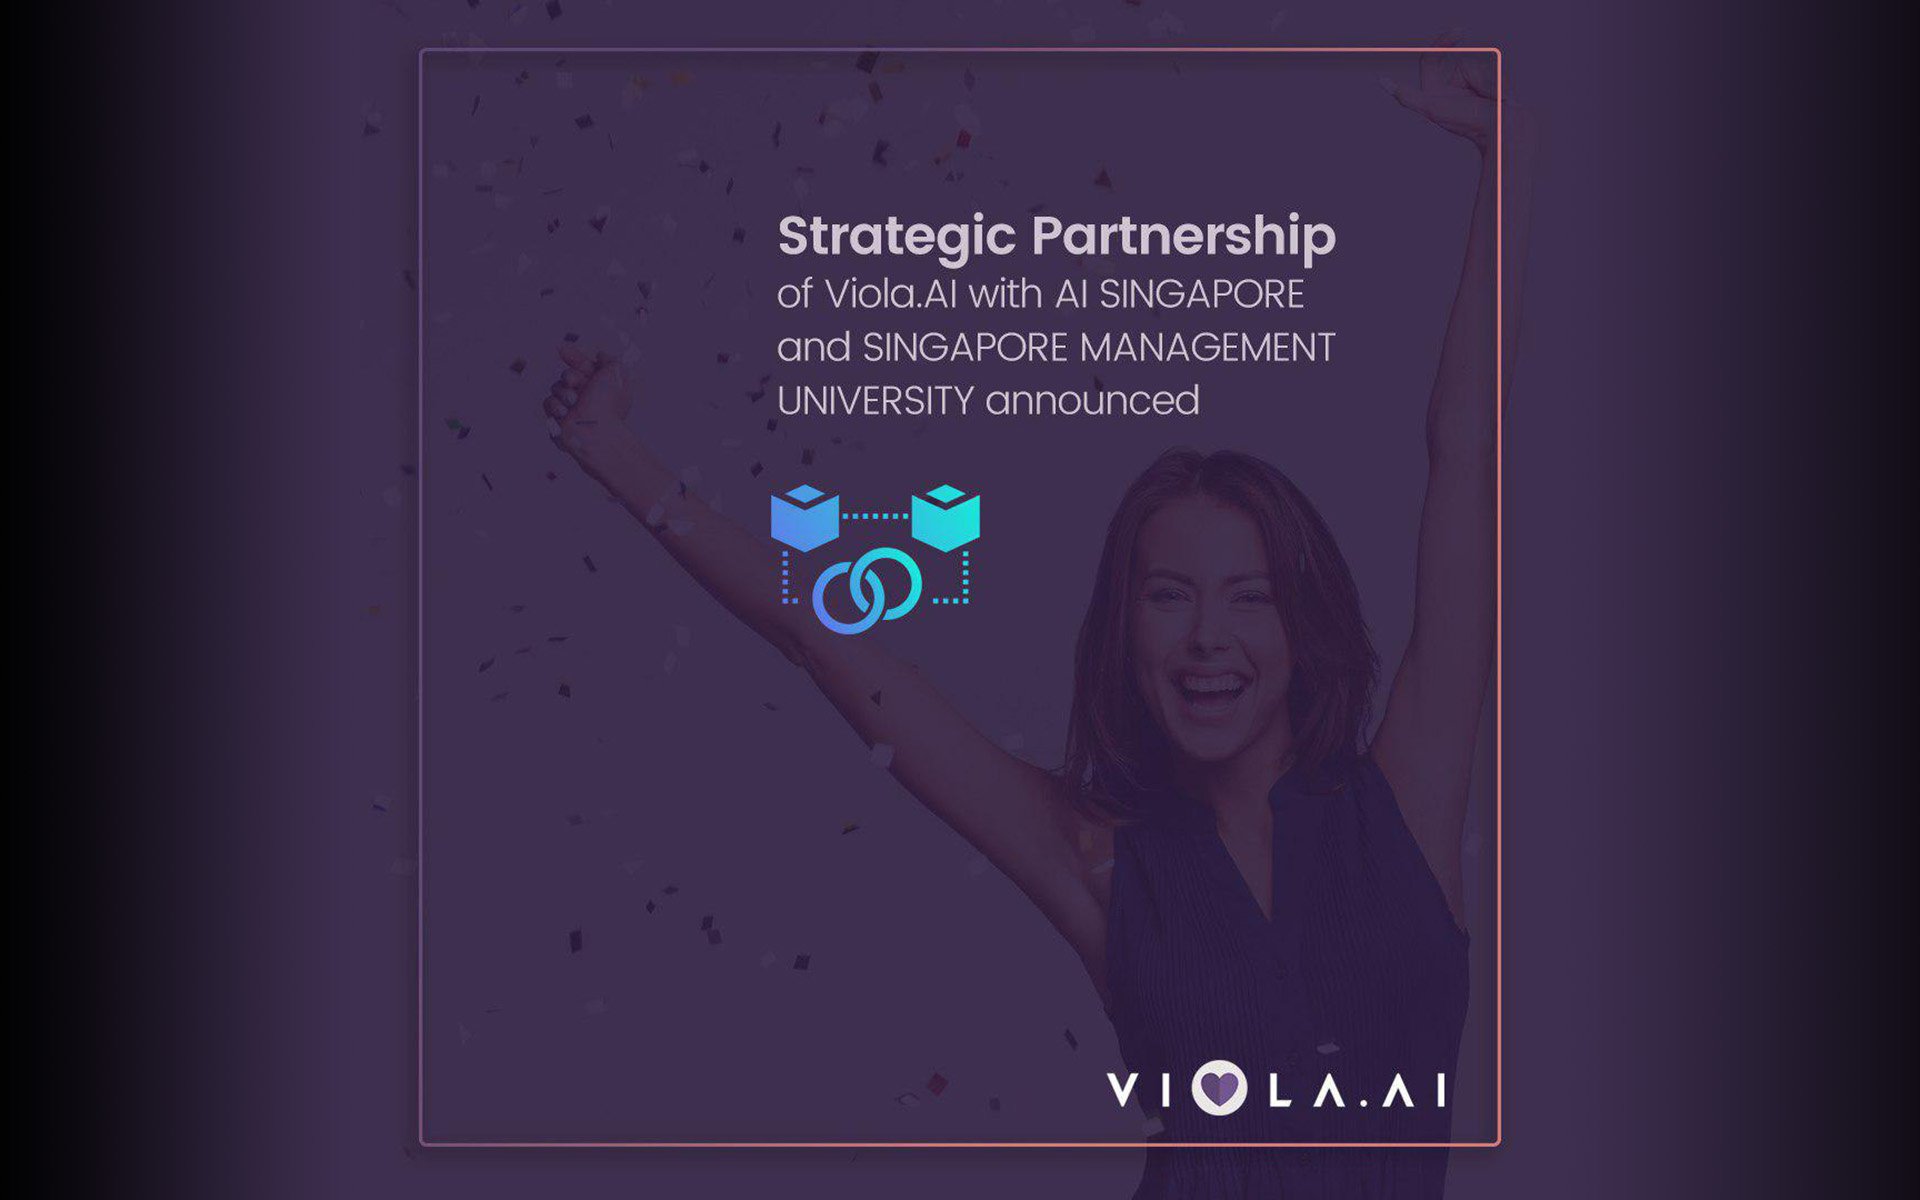 Viola.AI, AI Singapore and Singapore Management University Announced Strategic Partnership to Develop Robust AI Matching and Recommendations Engine for World's First Lifelong Love AI